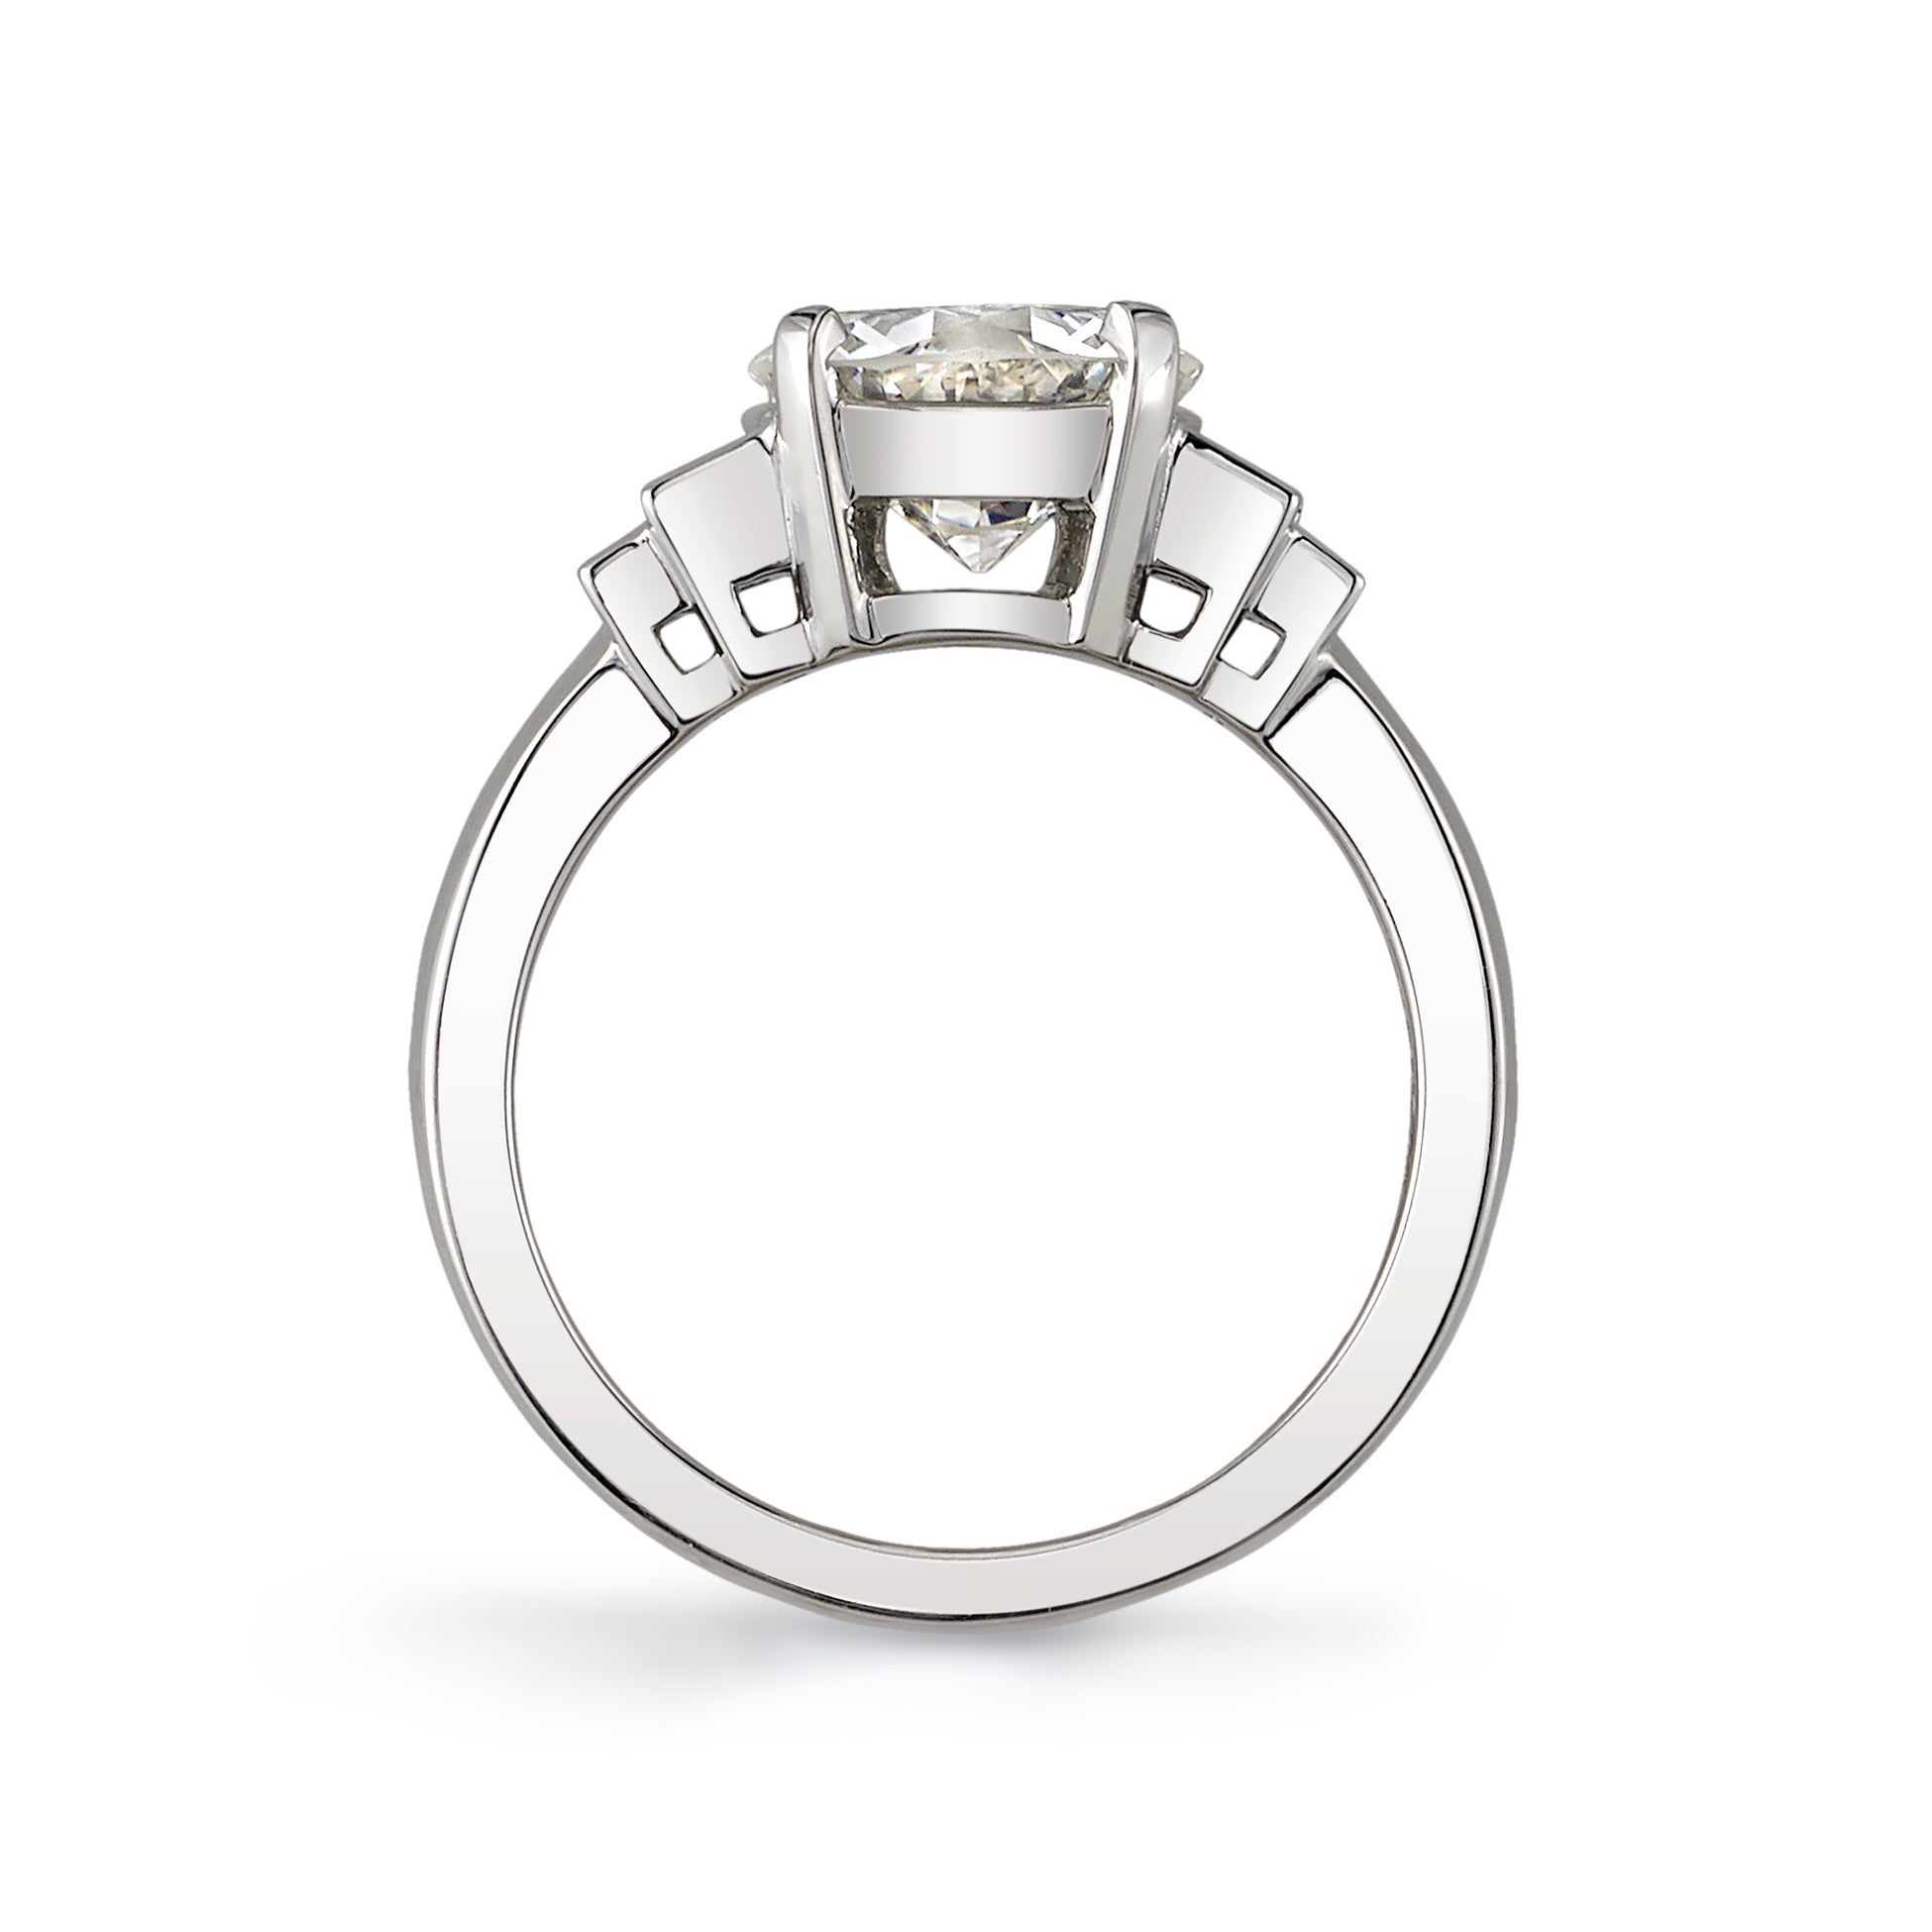 SINGLE STONE SCOUT RING featuring 2.03ct H/VVS2 GIA certified old European cut diamond with 0.31ctw baguette cut diamond accents set in a handcrafted platinum mounting.